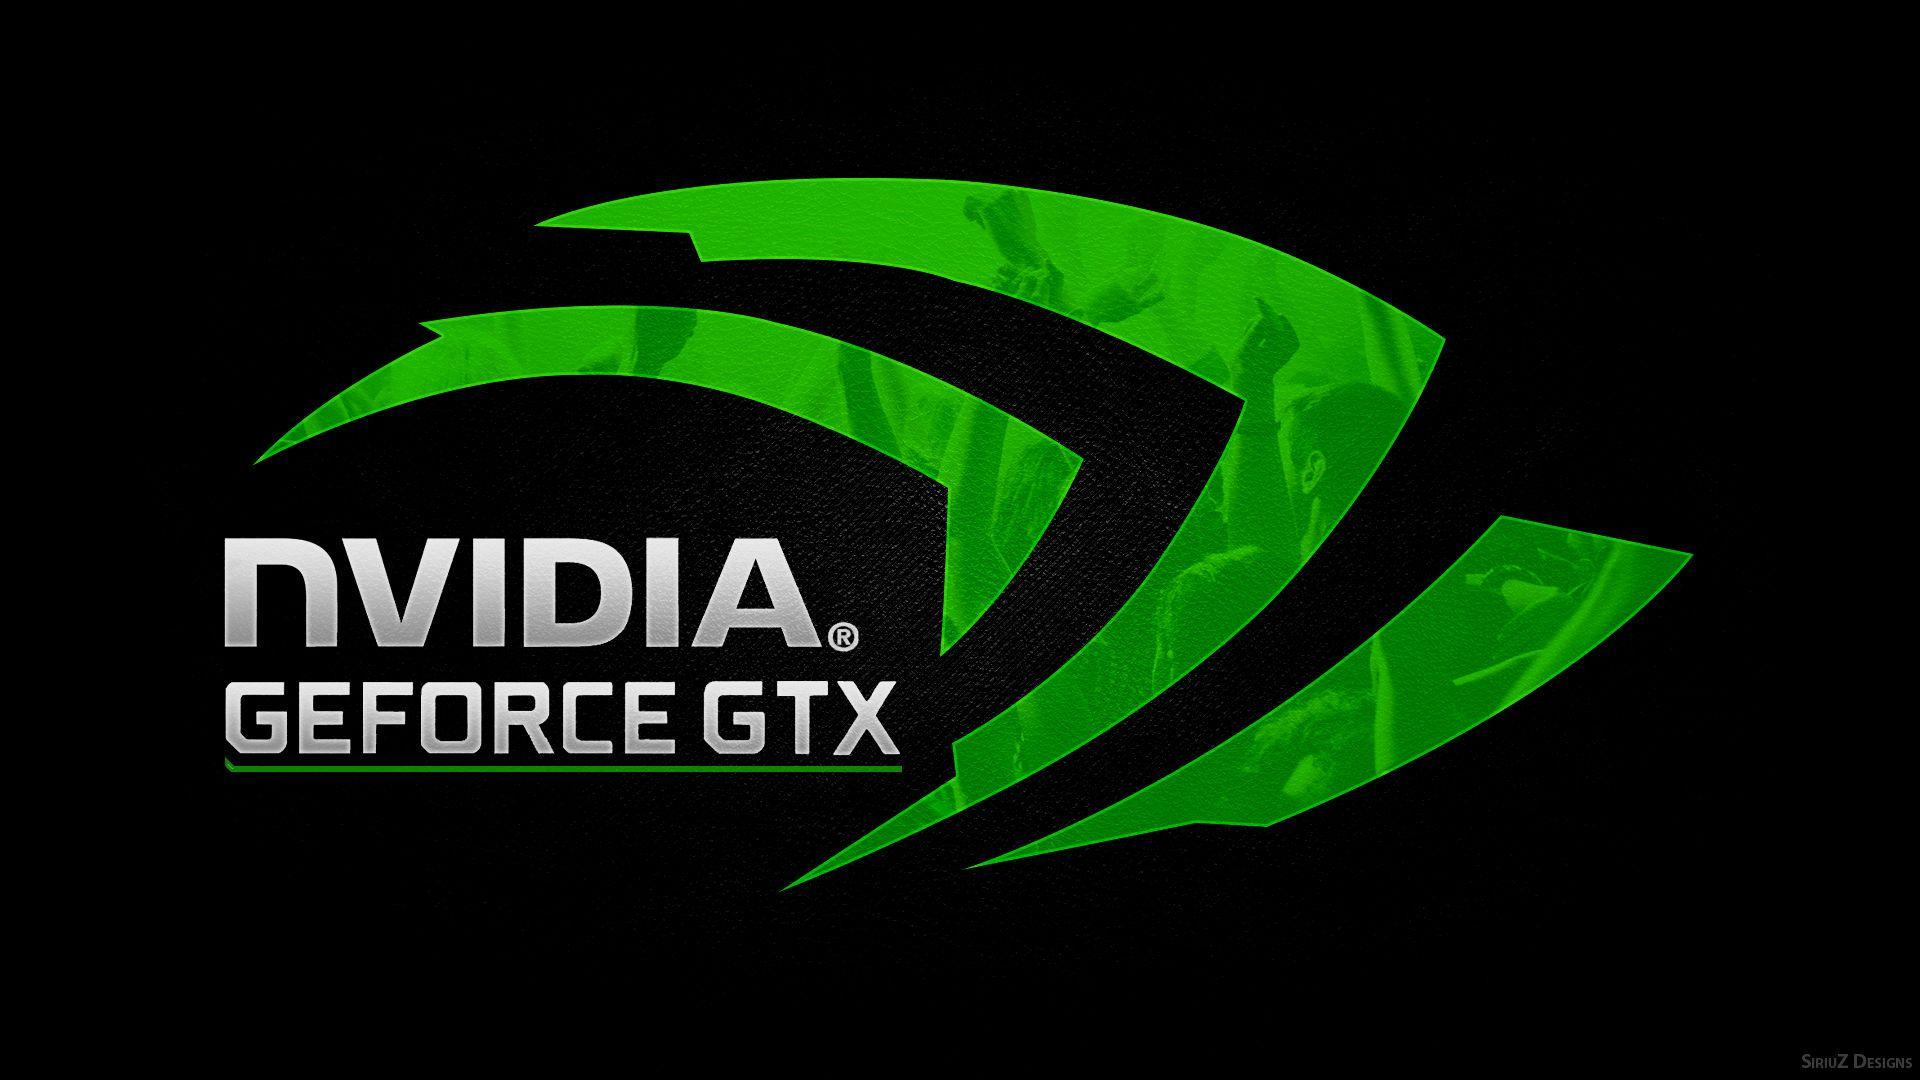 image leaked for the PCB pointing towards upcoming NVIDIA GeForce